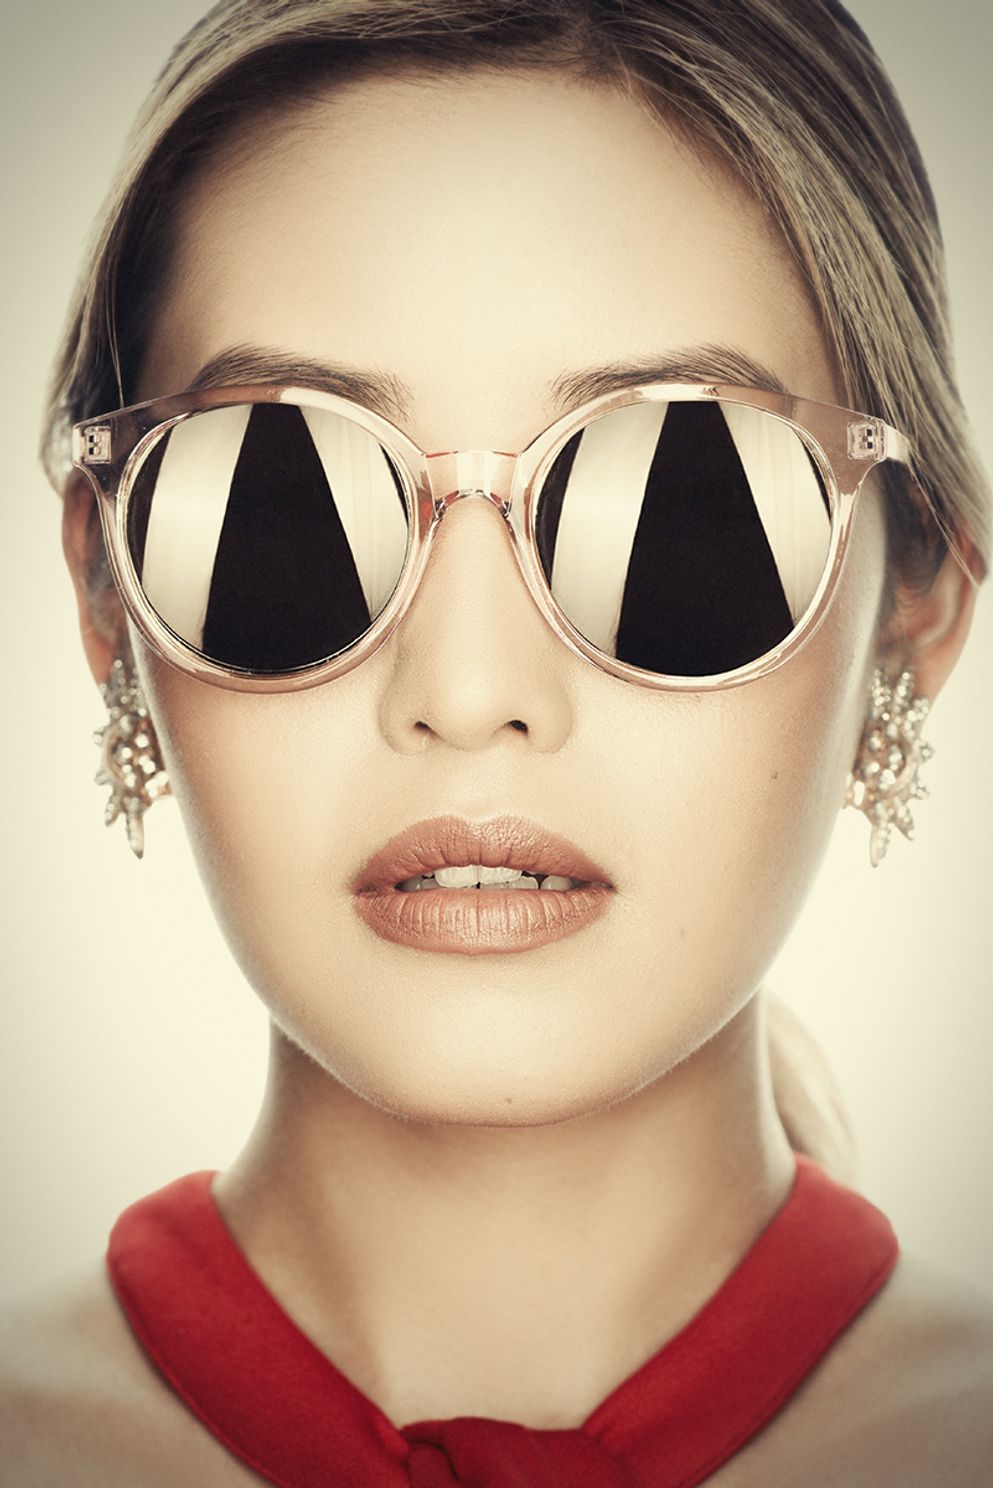 extraordinary capture of a fashionista wearing glasses the softboxes reflected by the sunglasses